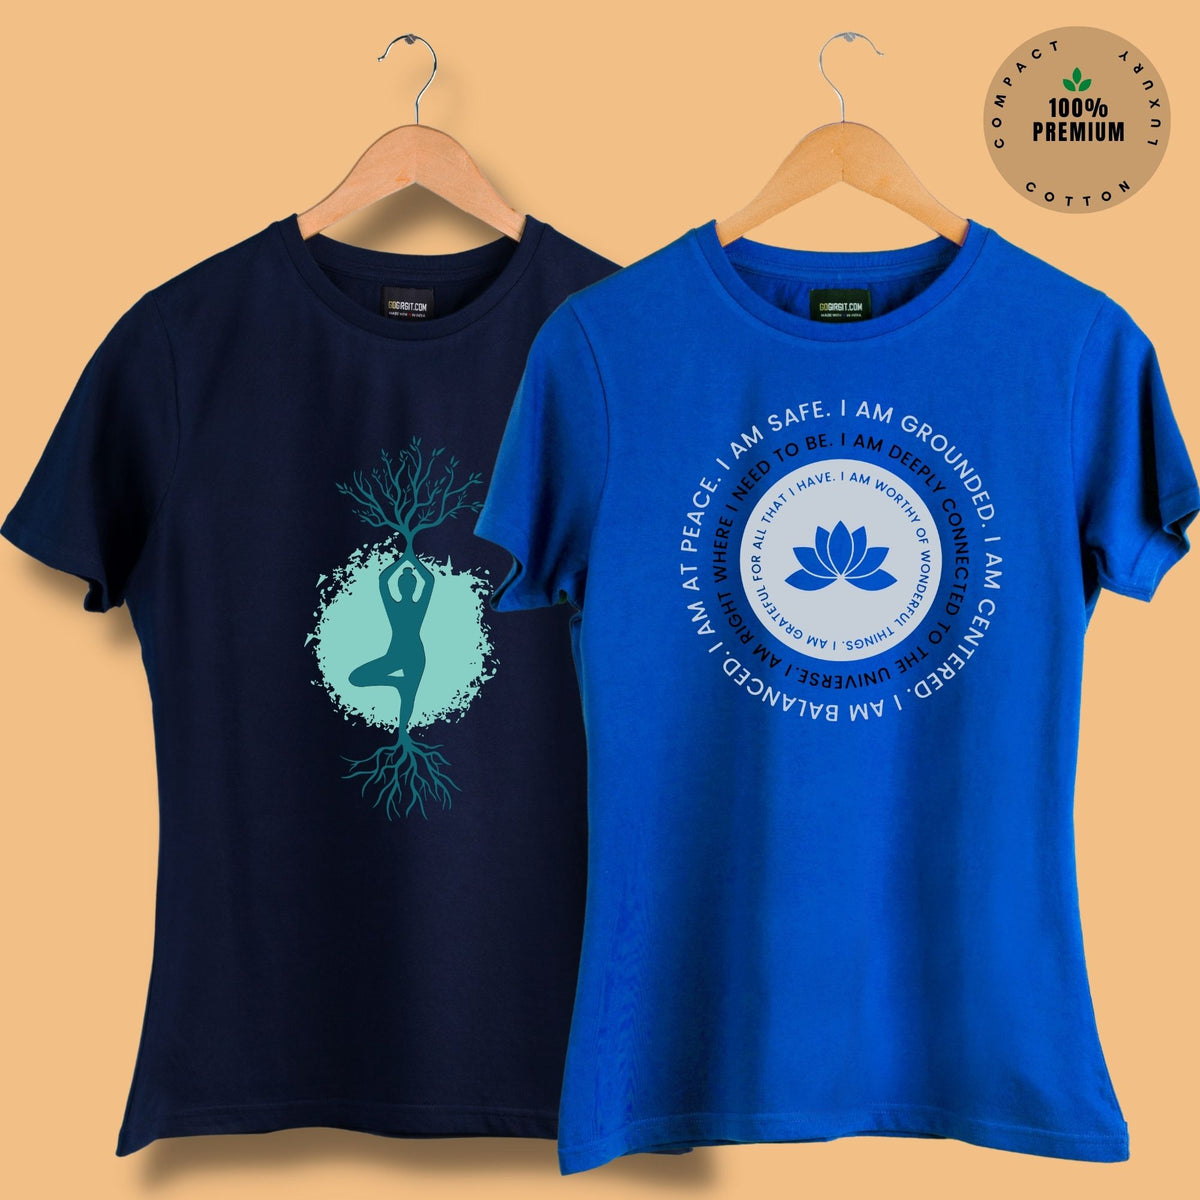 pack-of-2-women-s-printed-t-shirts-in-tree-pose-navy-blue-affirmation-royal-blue-design-tshirt